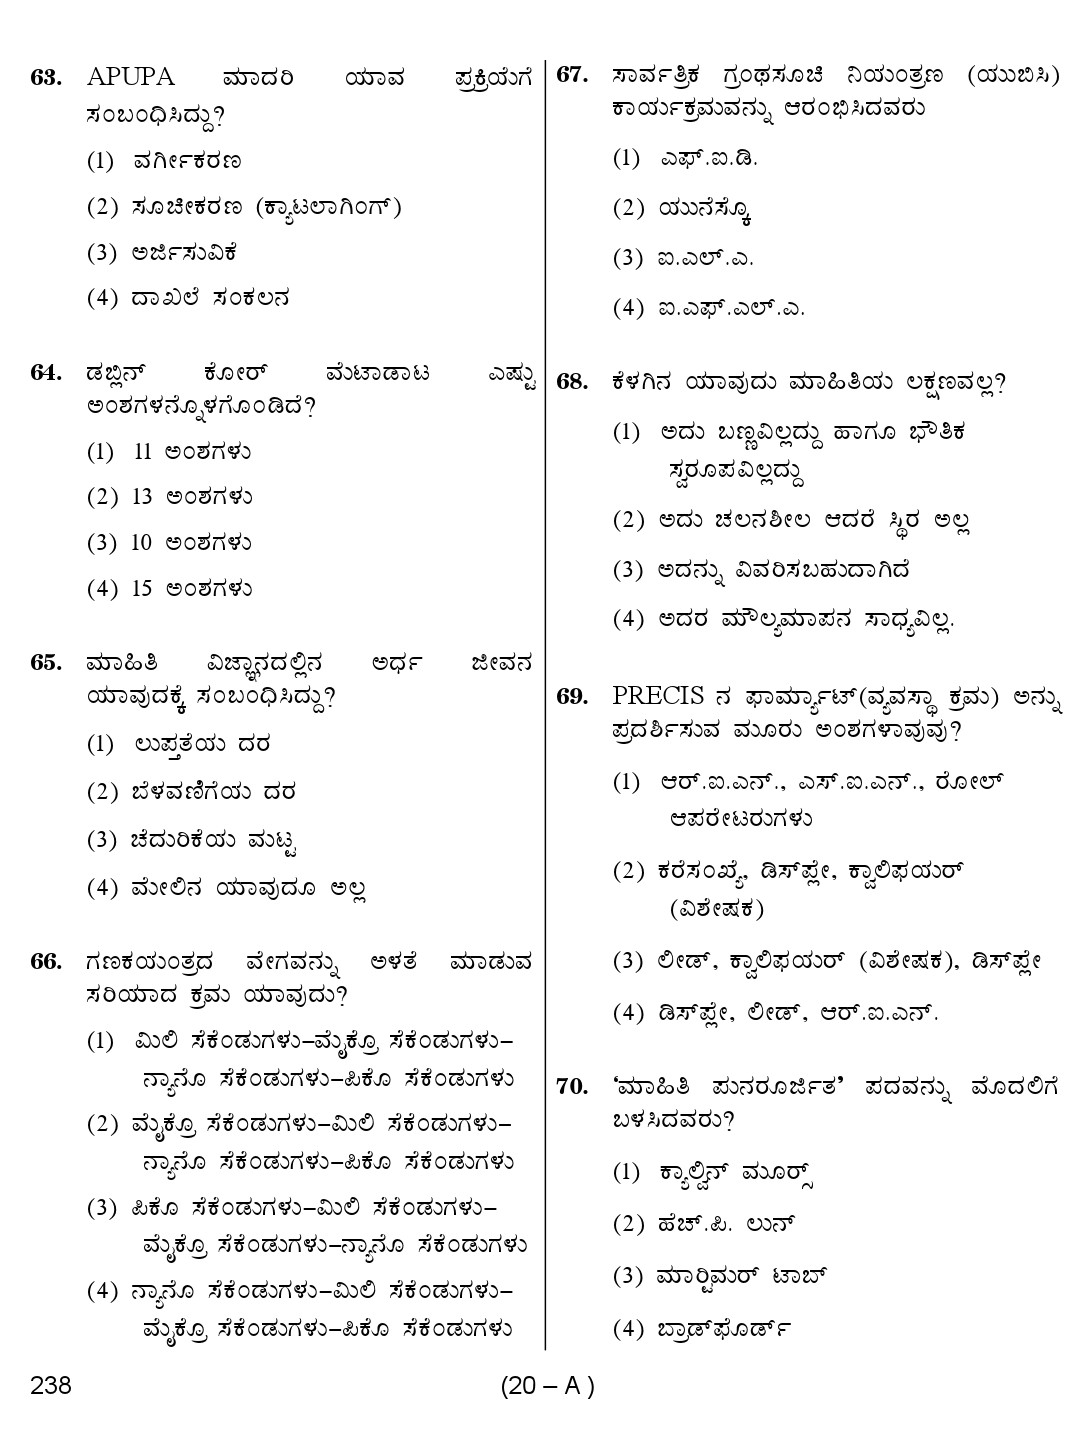 Karnataka PSC 238 Specific Paper II Librarian Exam Sample Question Paper 20